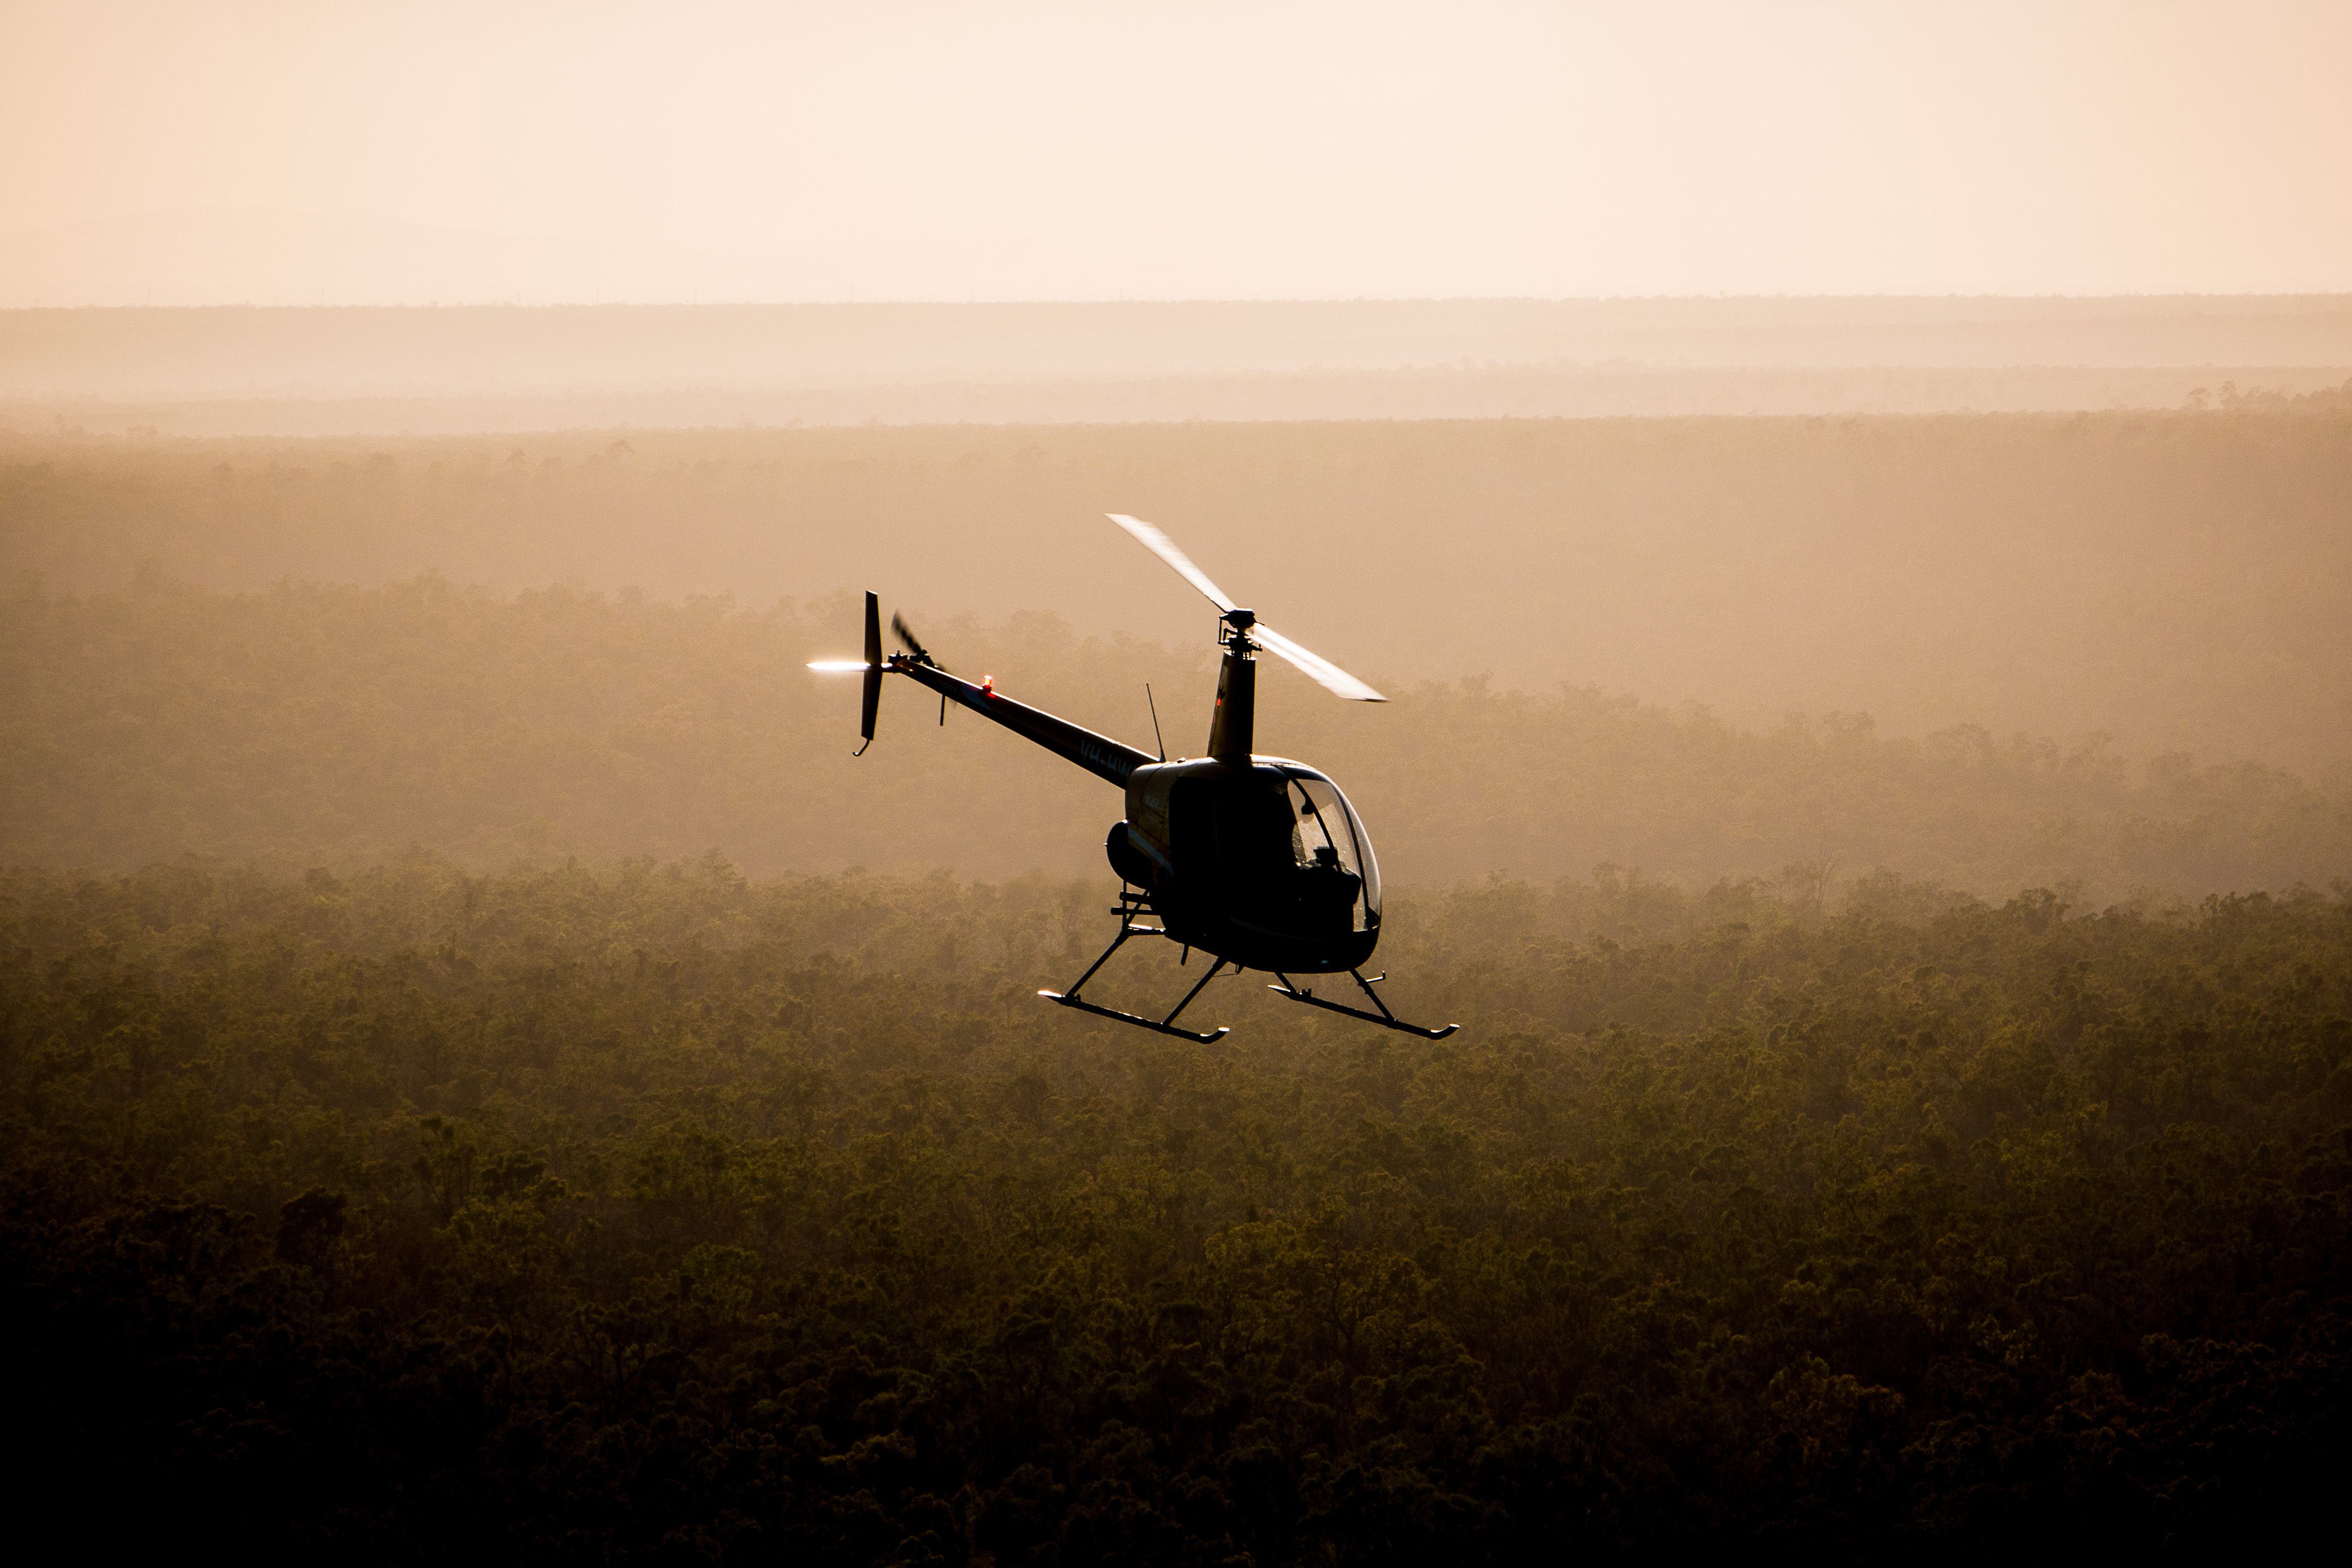 The Flying Stockman - Each morning he eagerly awaits for the first crack of sunlight giving him permission to takeoff. 
As he ferries his chopper through the crisp morning air he watches from above the bush slowly come alive.